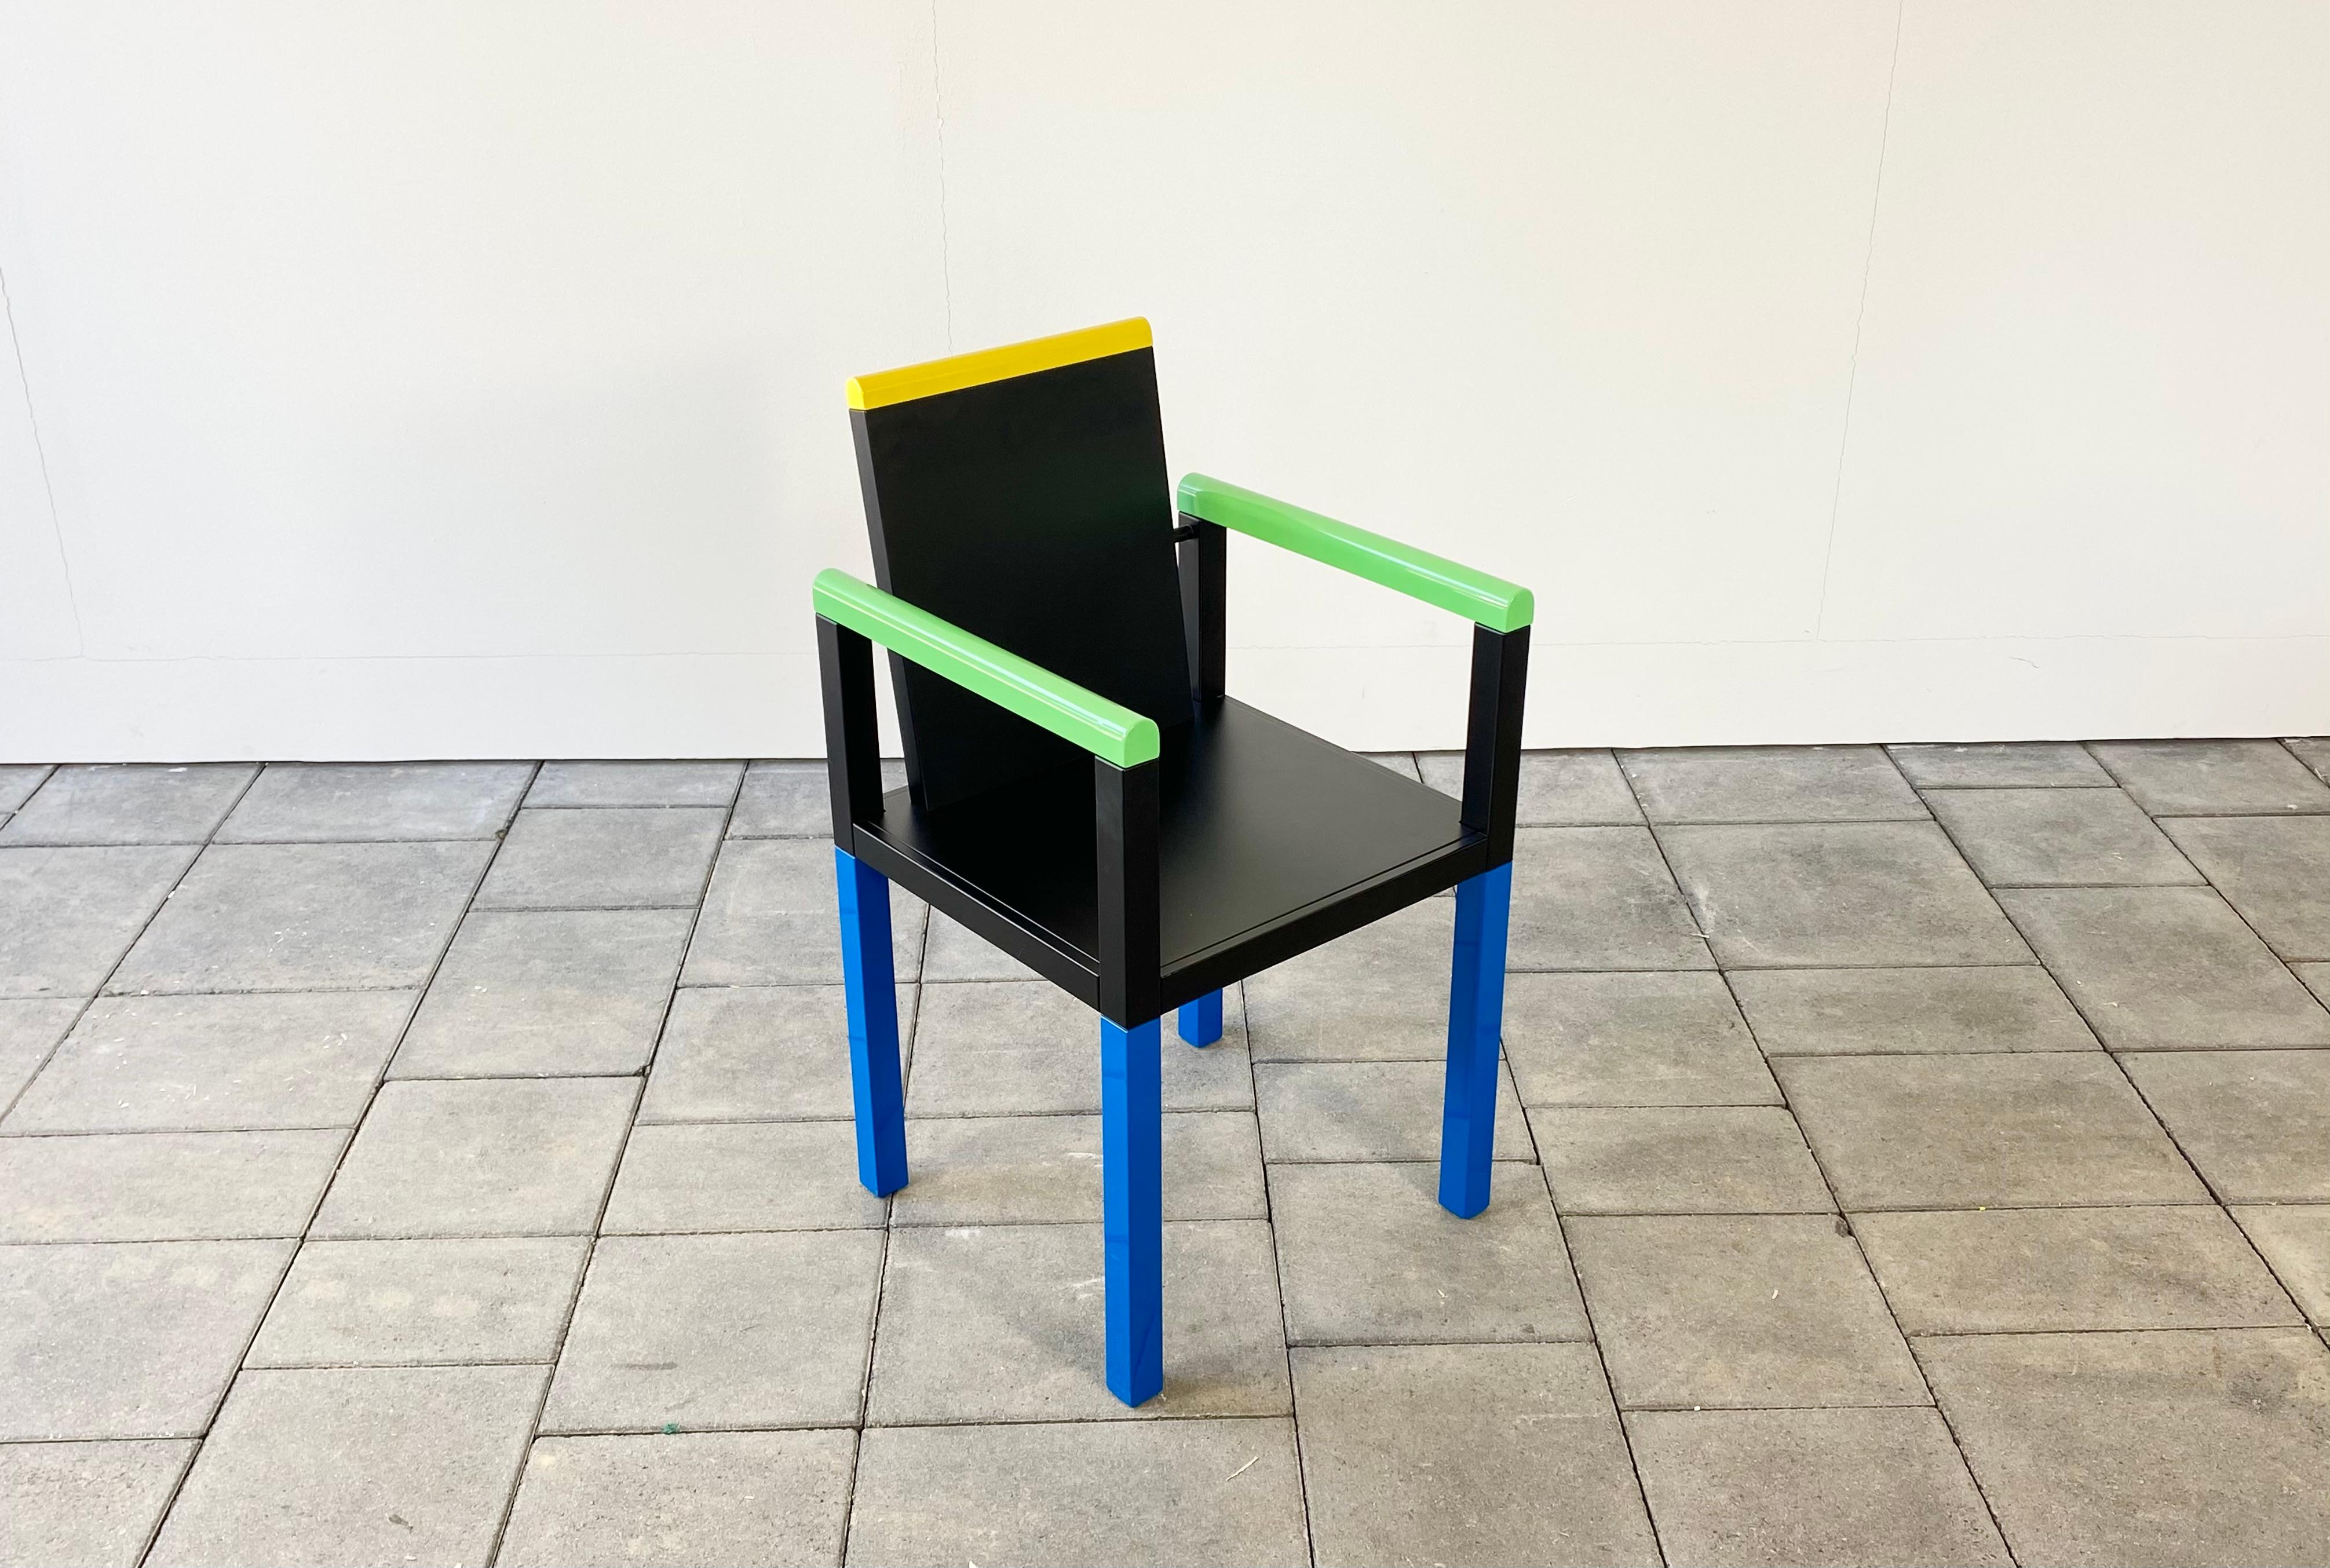 1980ies Memphis Milano Palace chair in colored lacquered wood designed by George Sowden, 1983.

George Sowden studied architecture at Gloucestershire College of Art in the 1960ies and moved to Milano in 1970. He worked with Ettore Sottsass and